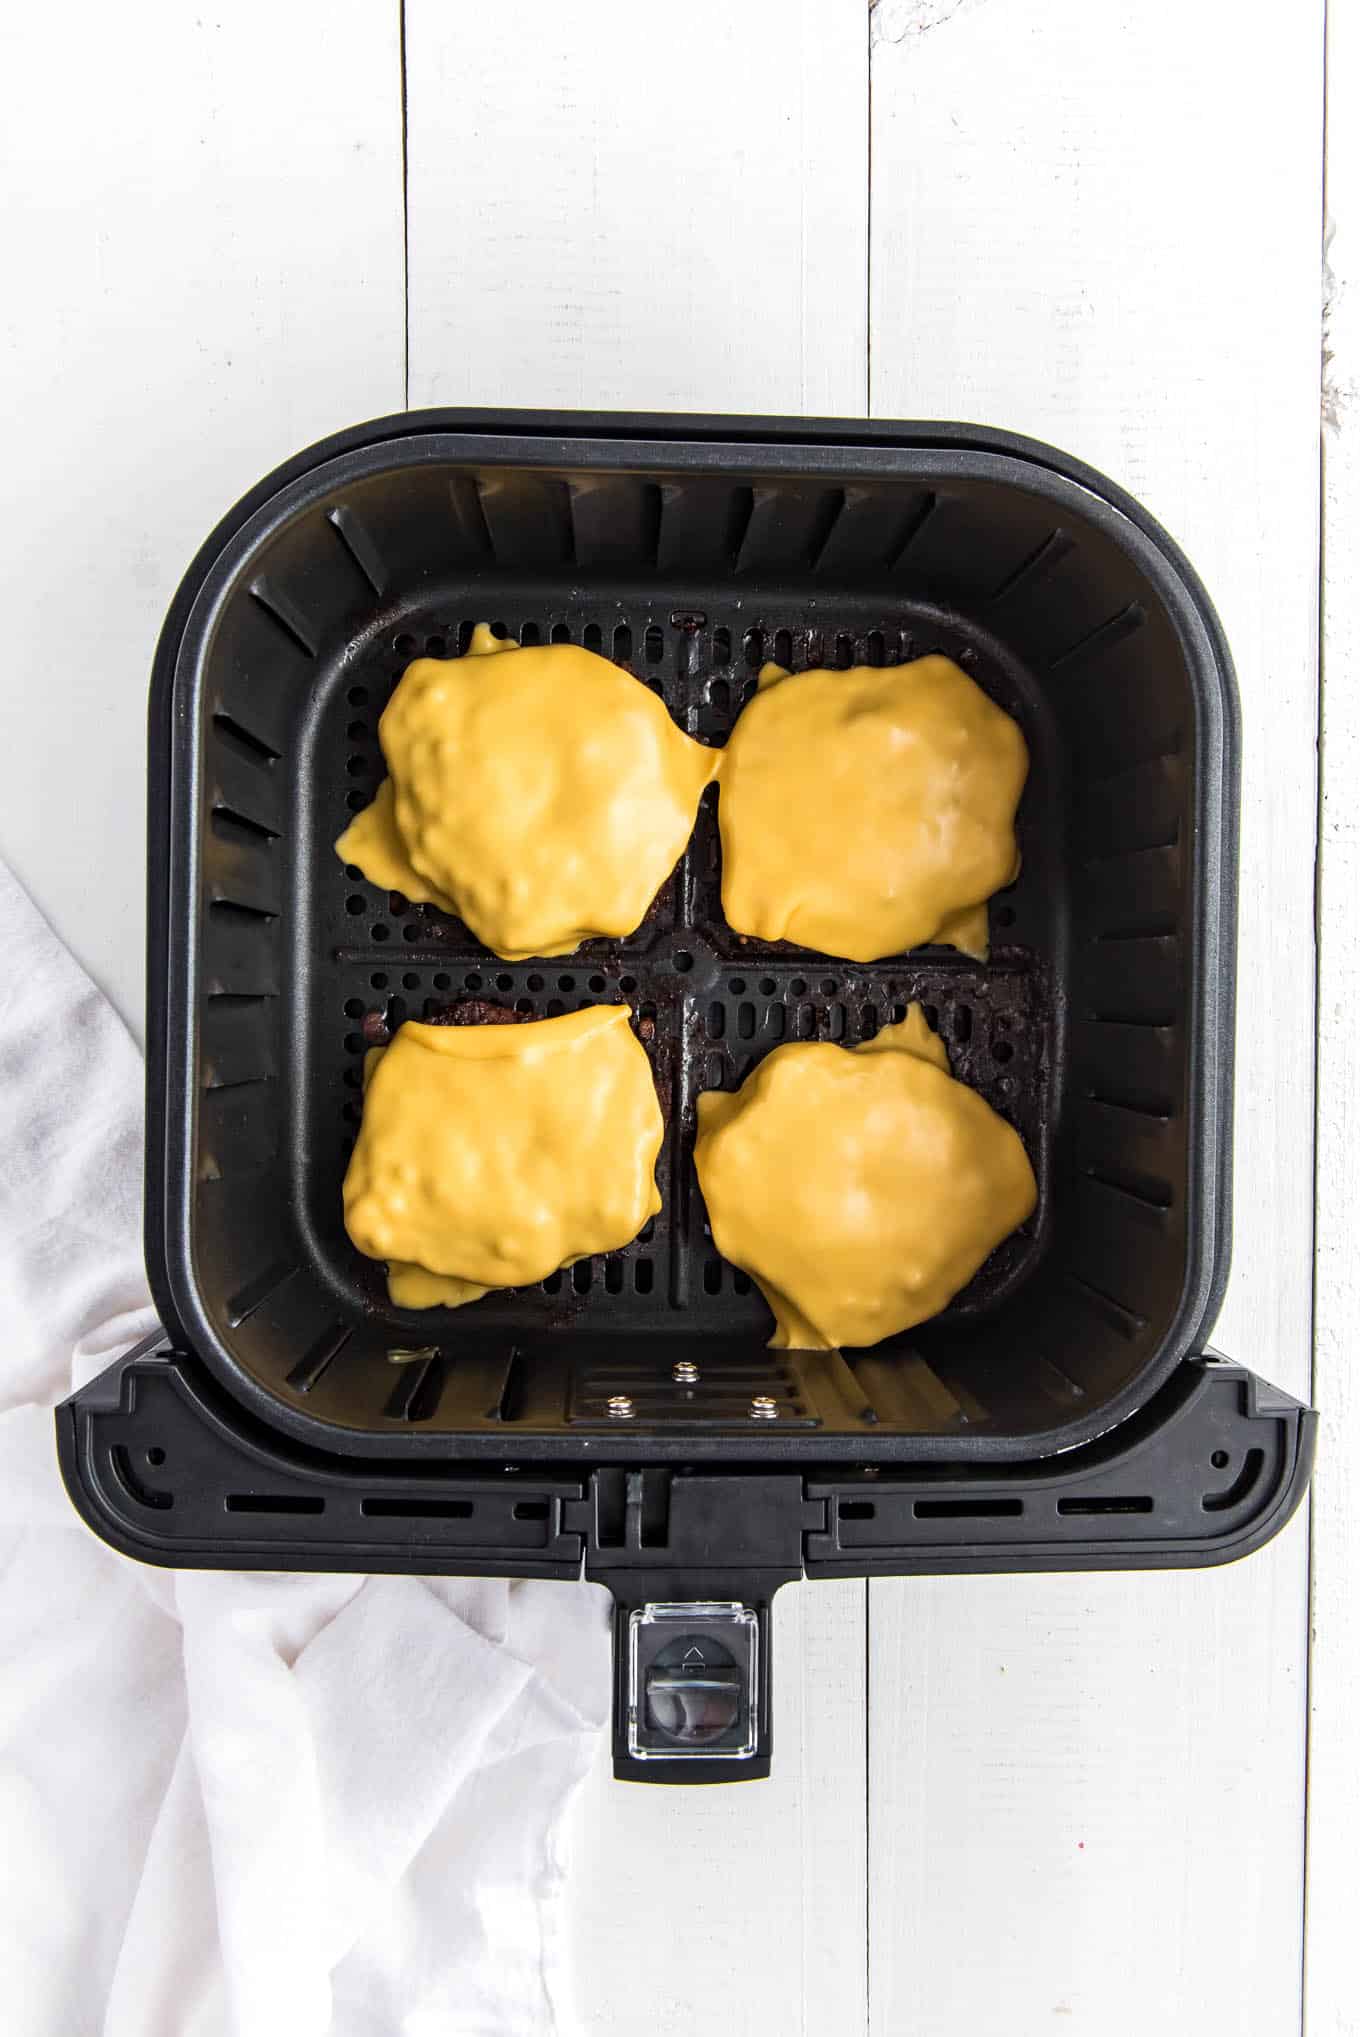 Frozen burgers in the air fryer are topped with melted cheese.